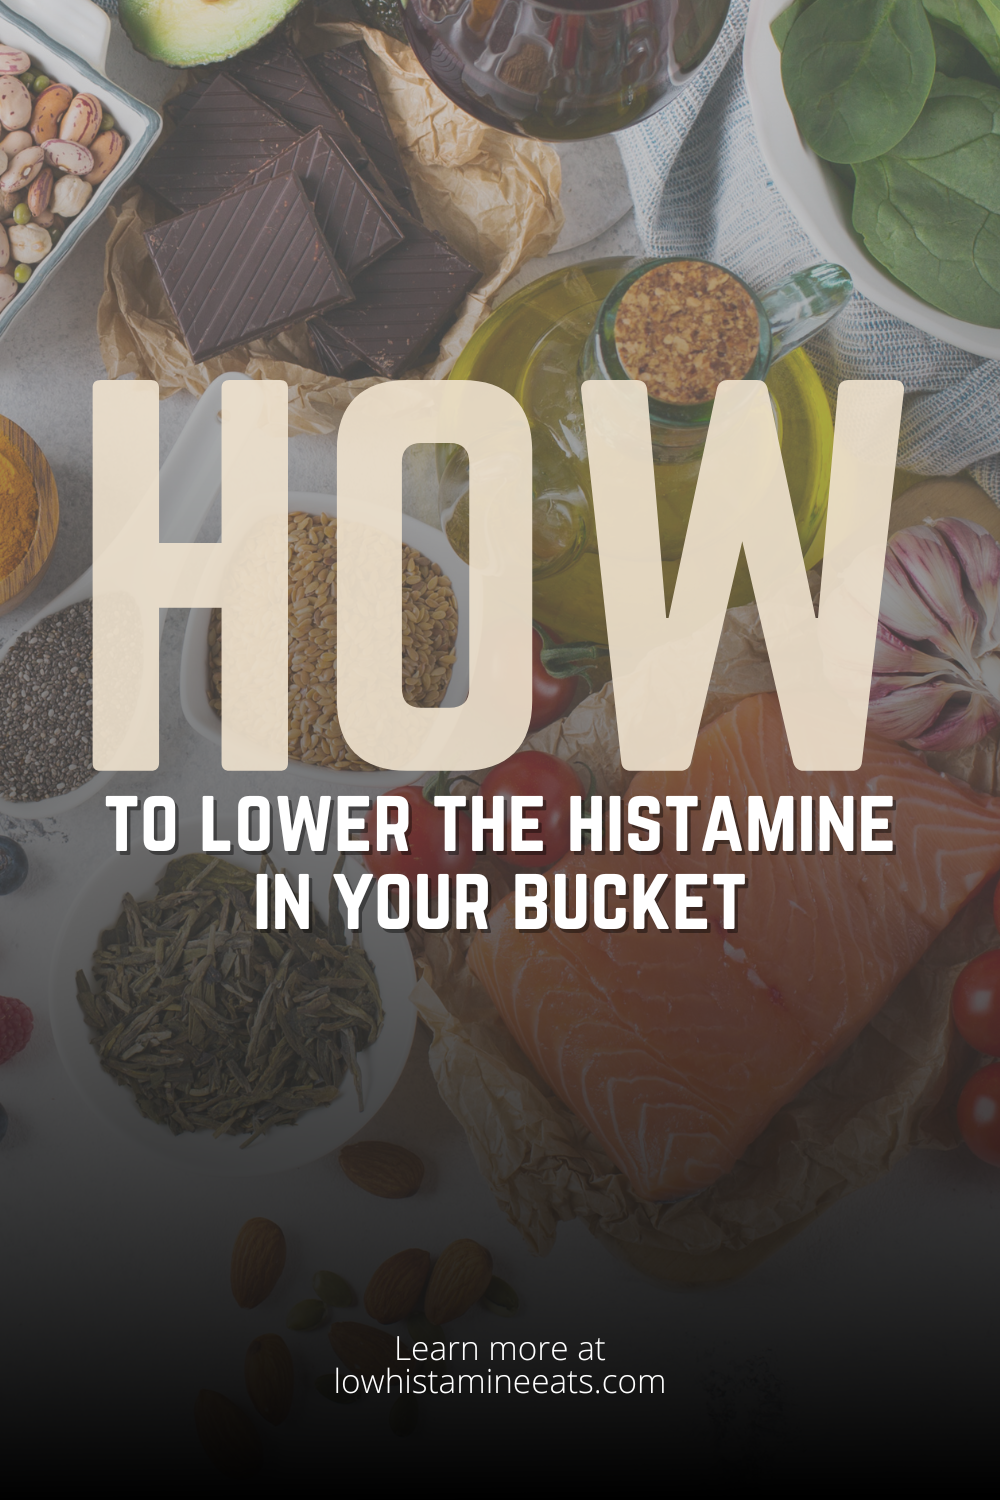 Assembled various foods on a flay lay photograph and a "How to Lower the Histamine in Your Bucket" in the center.